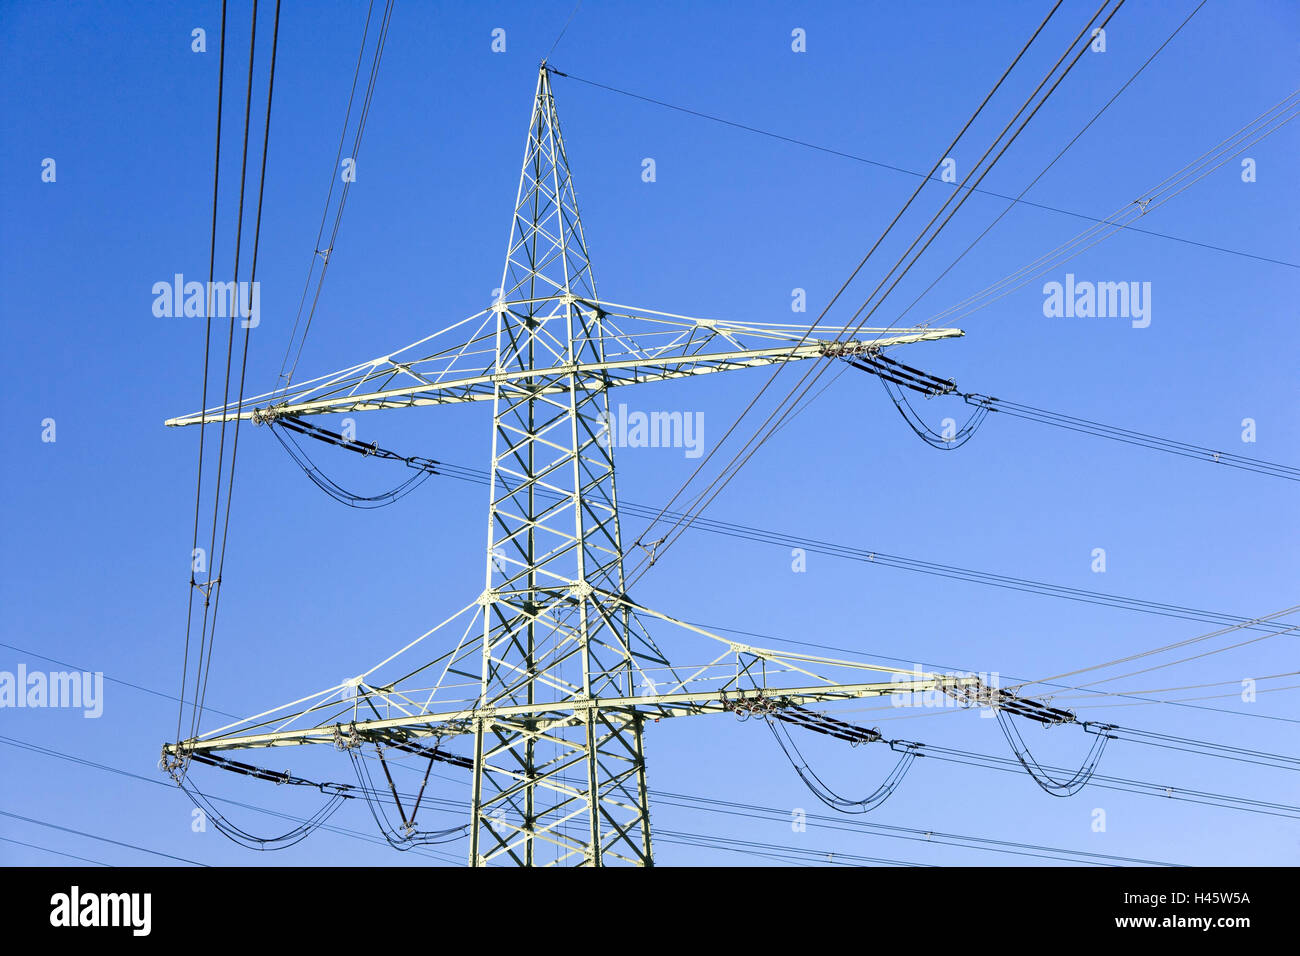 High-voltage poles, detail, mast, power poles, circuits, current, electricity, energy, power supply, electricity network, data link, network, power supply lines, high-tension circuit, voltage, high voltage, Überlandleitung, heaven, blue, Stock Photo